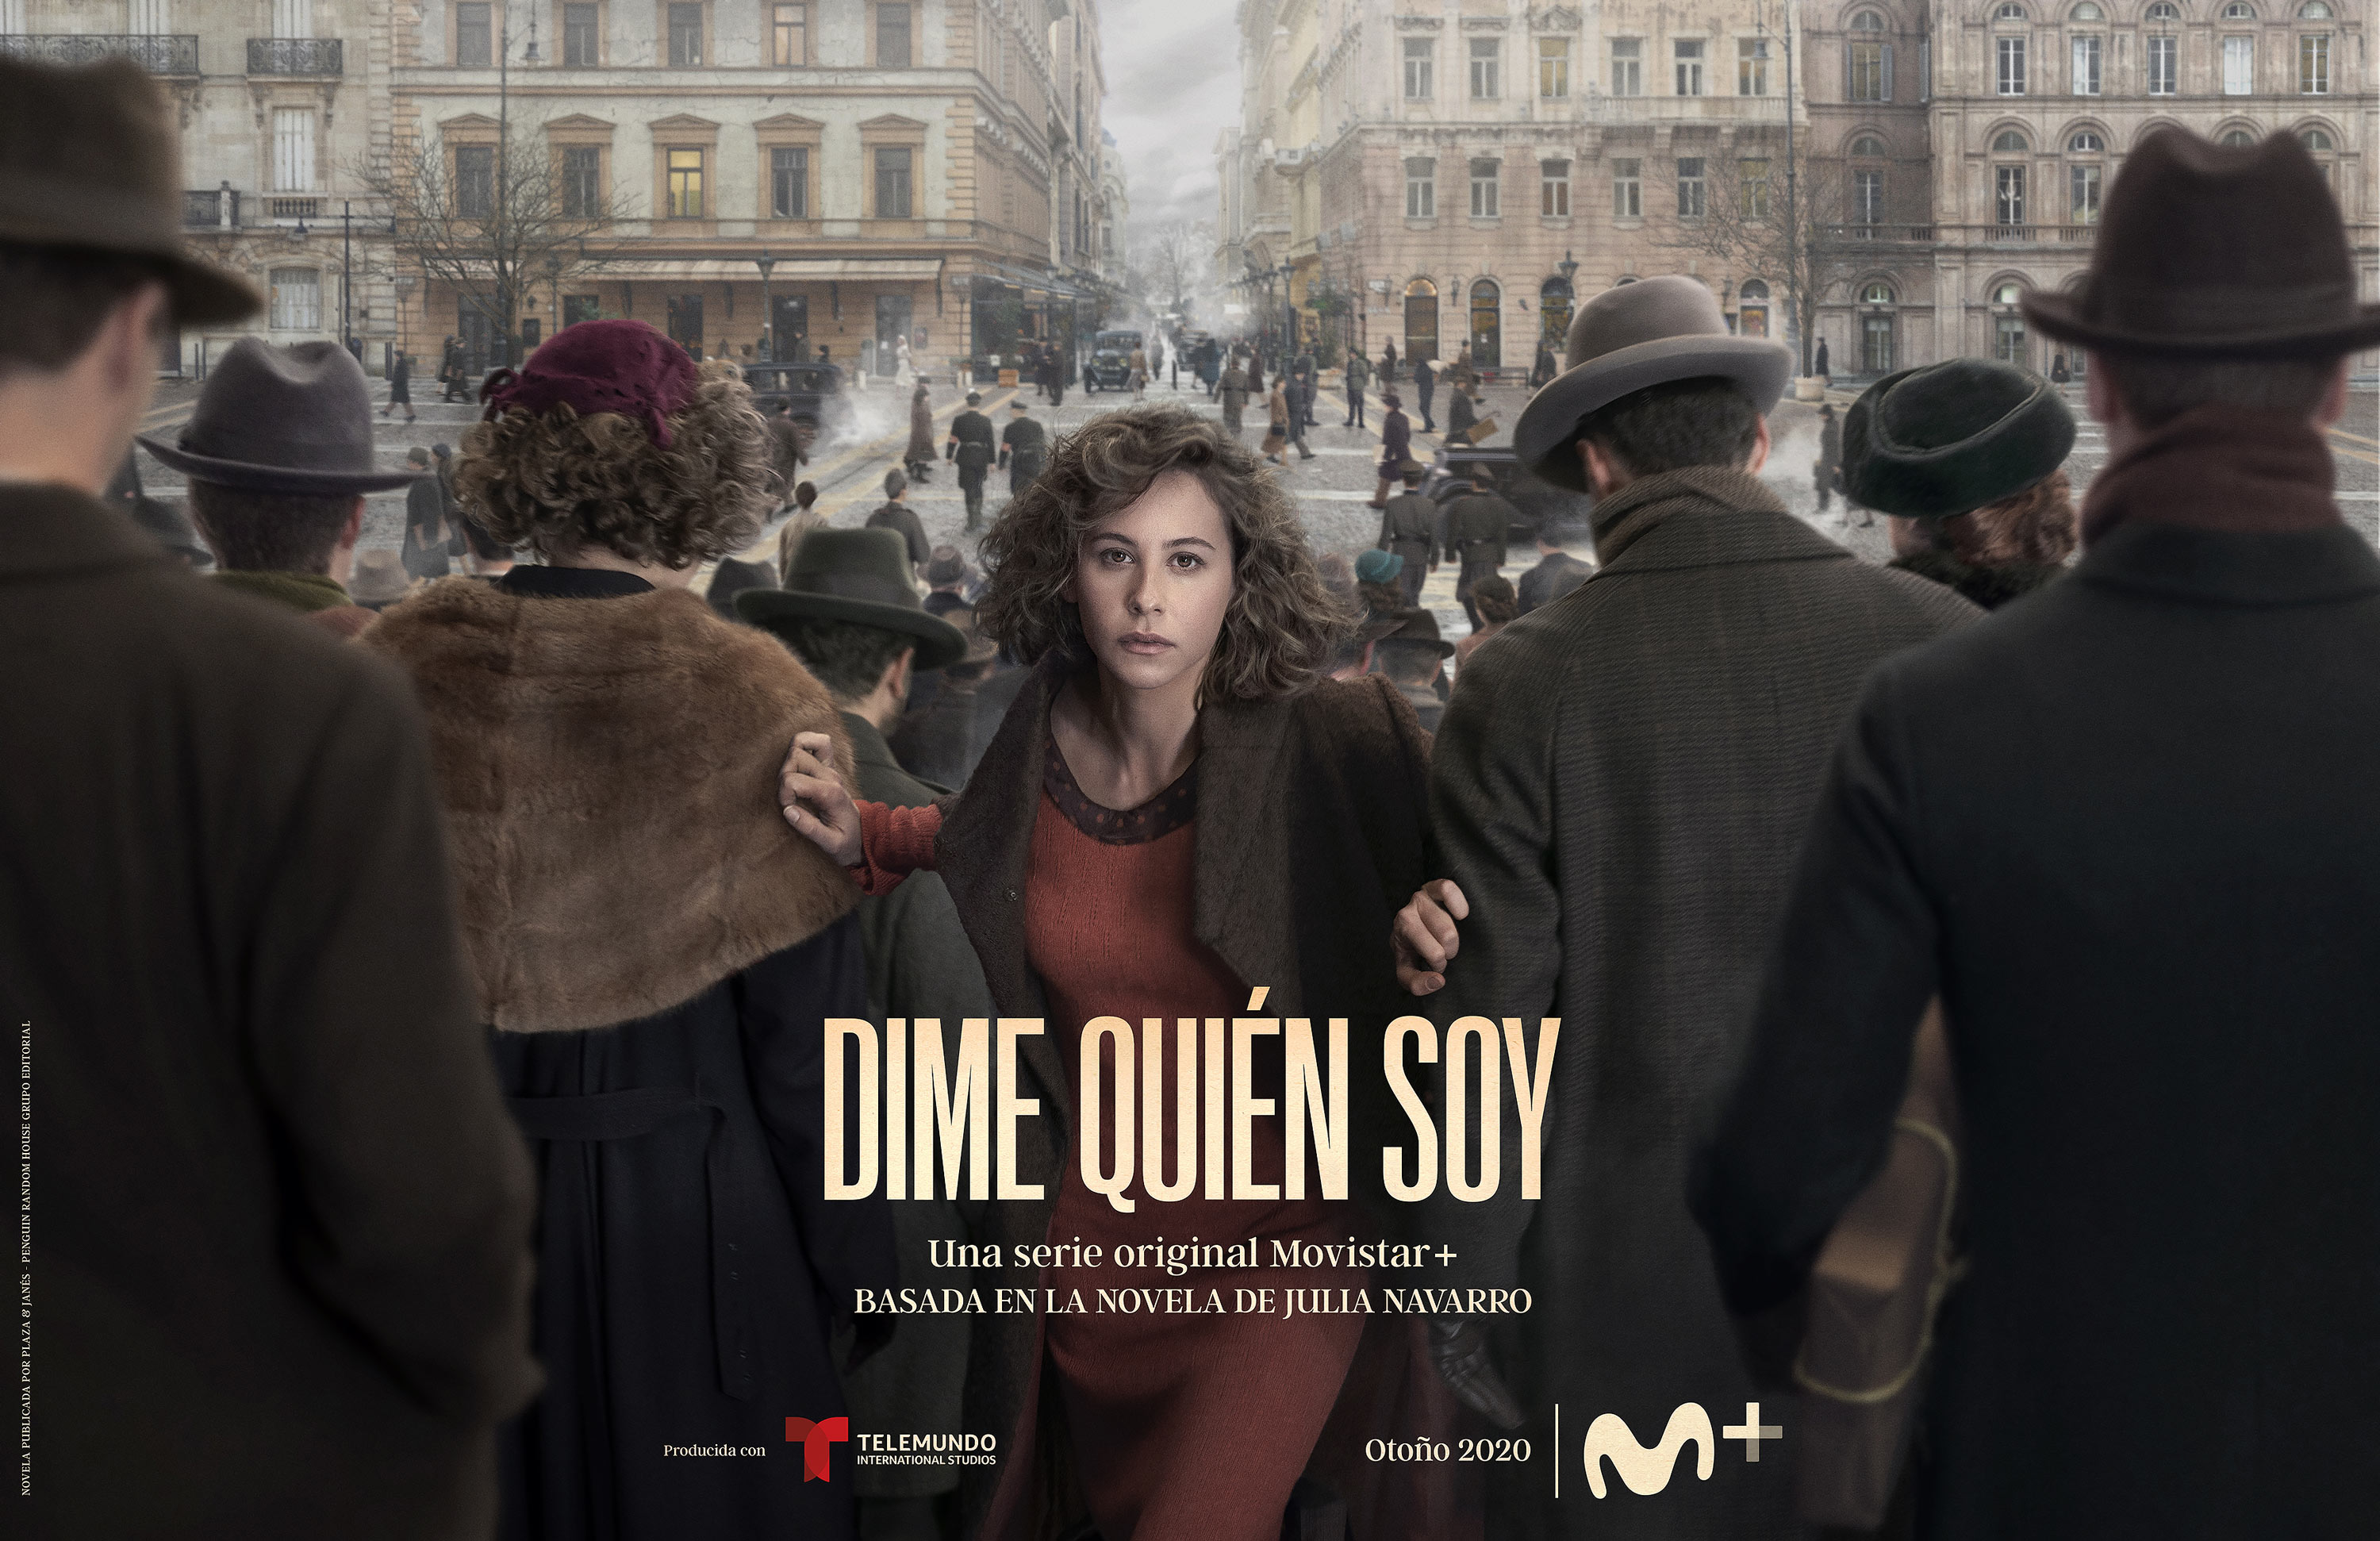 DIME-QUIEN-SOY-poster-by-JorgeAlvarino